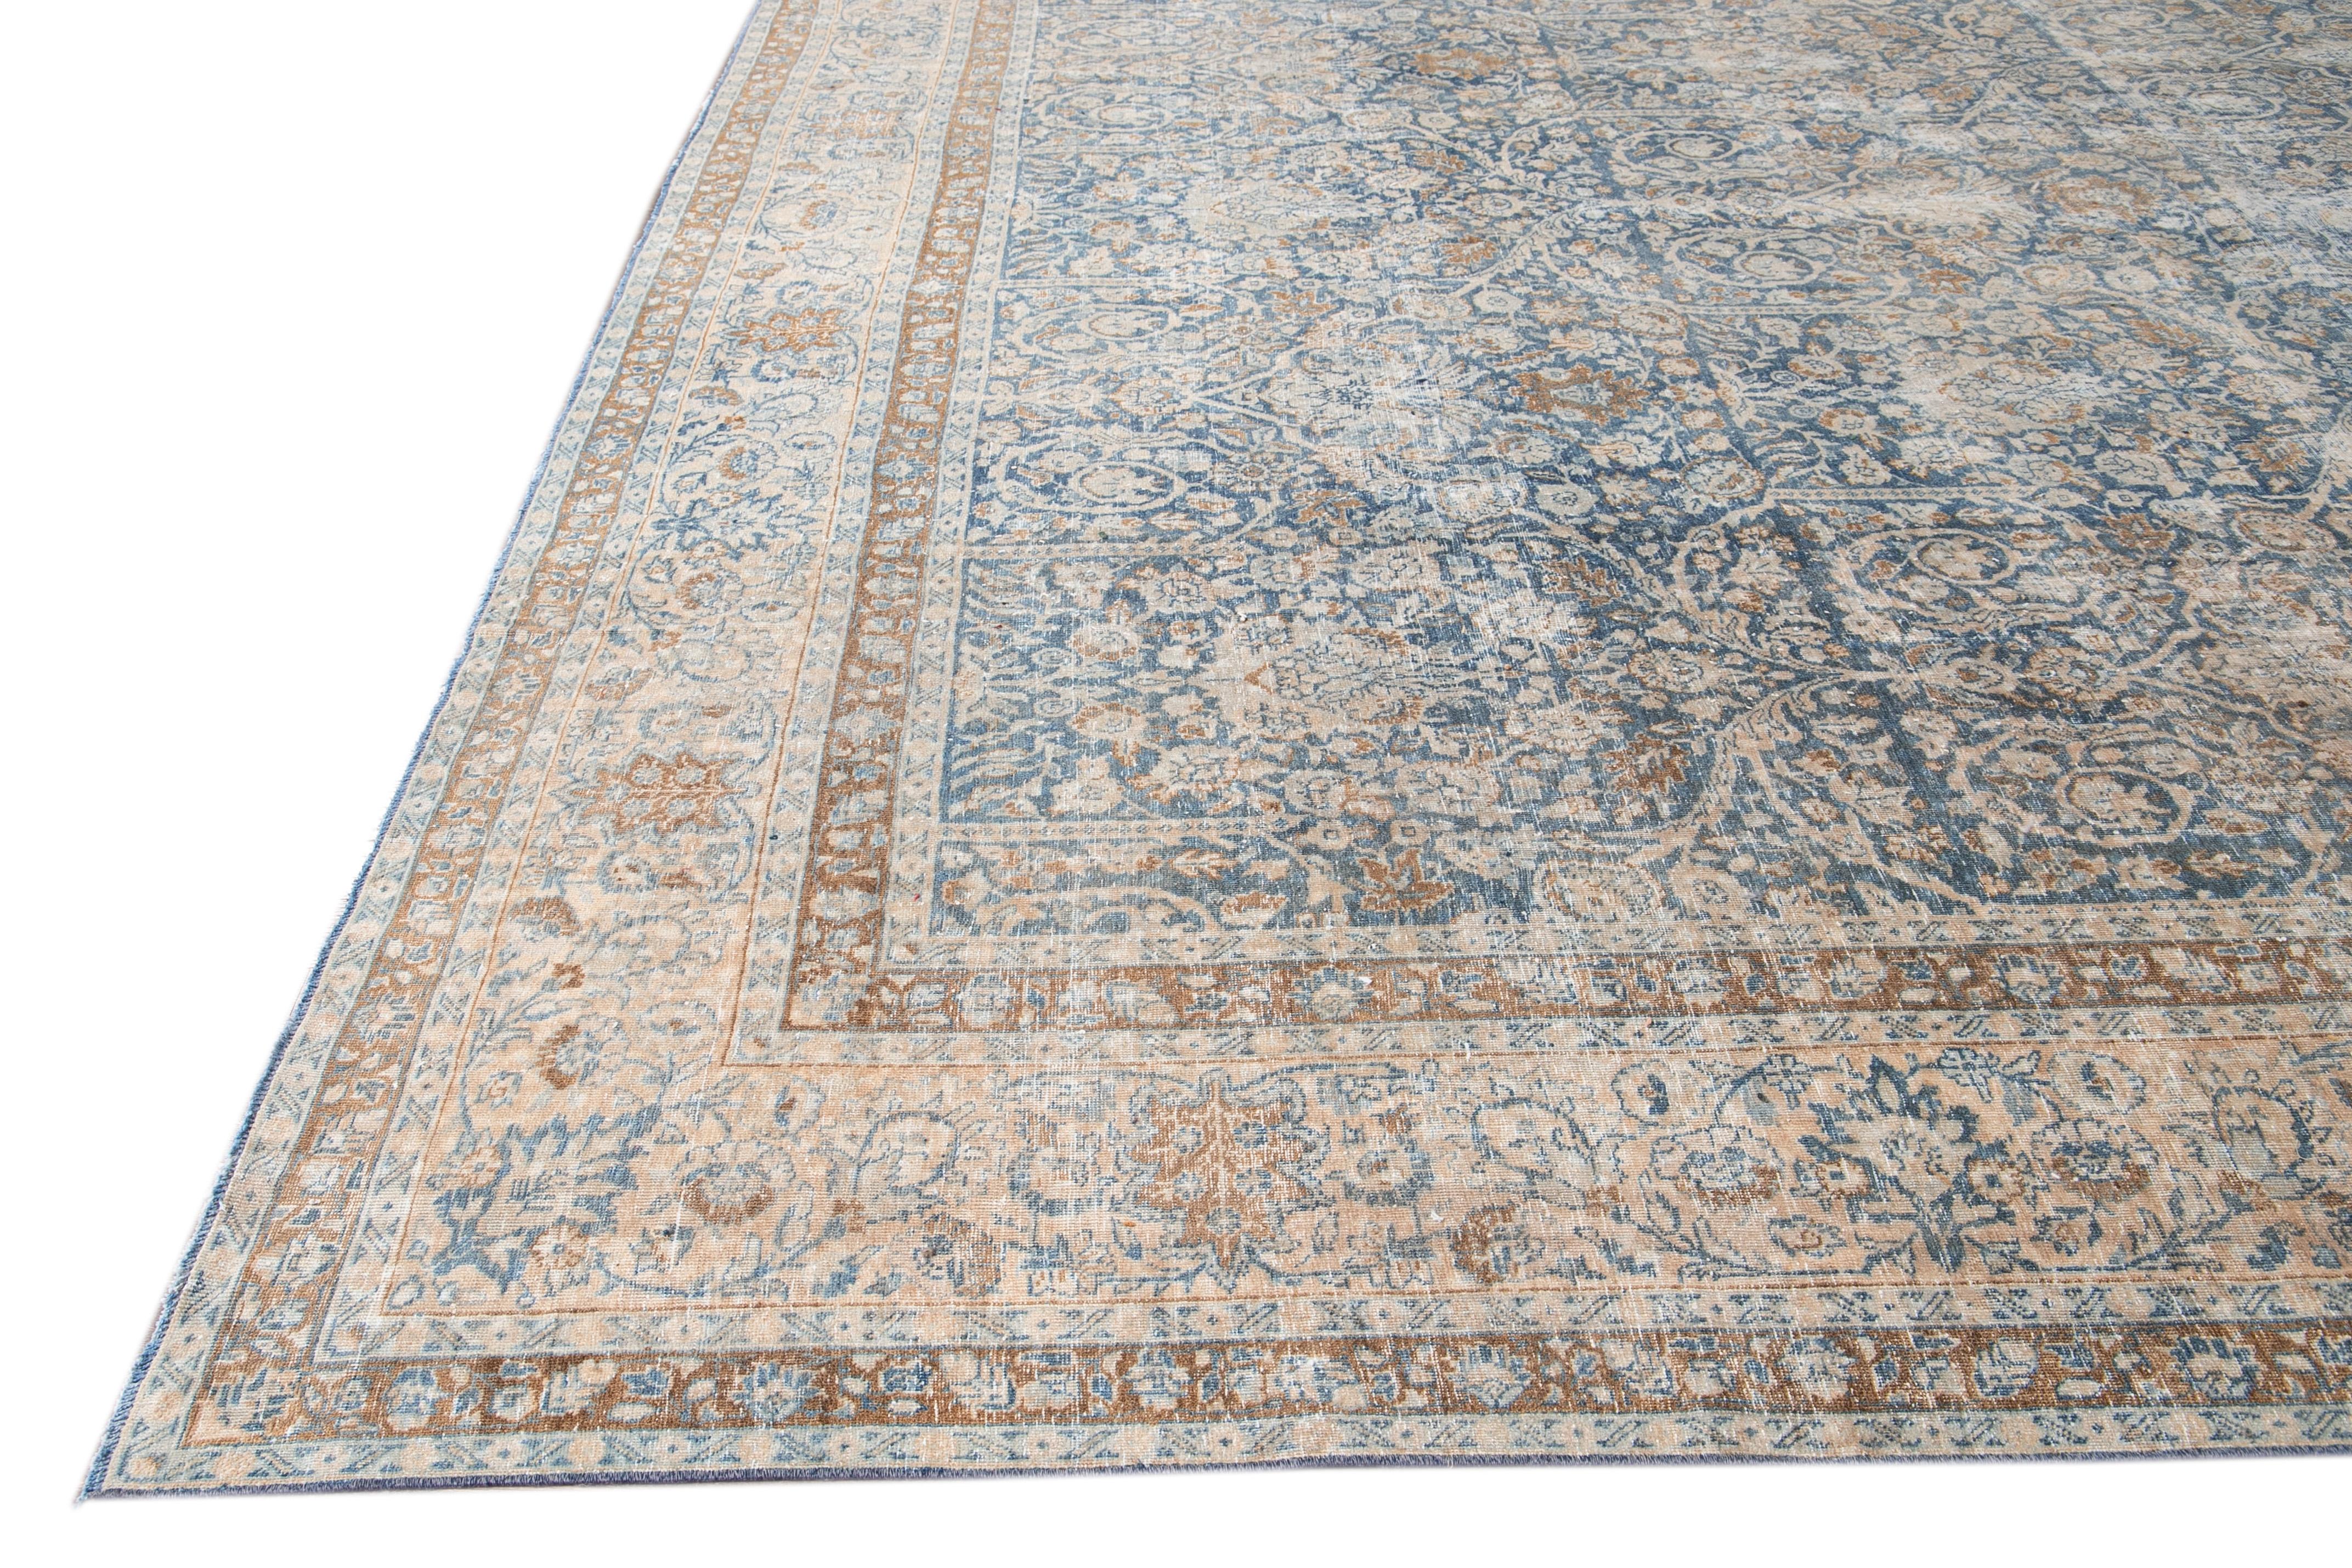 Persian Antique Shabby Chic Blue Tabriz Handmade Oversize Wool Rug For Sale